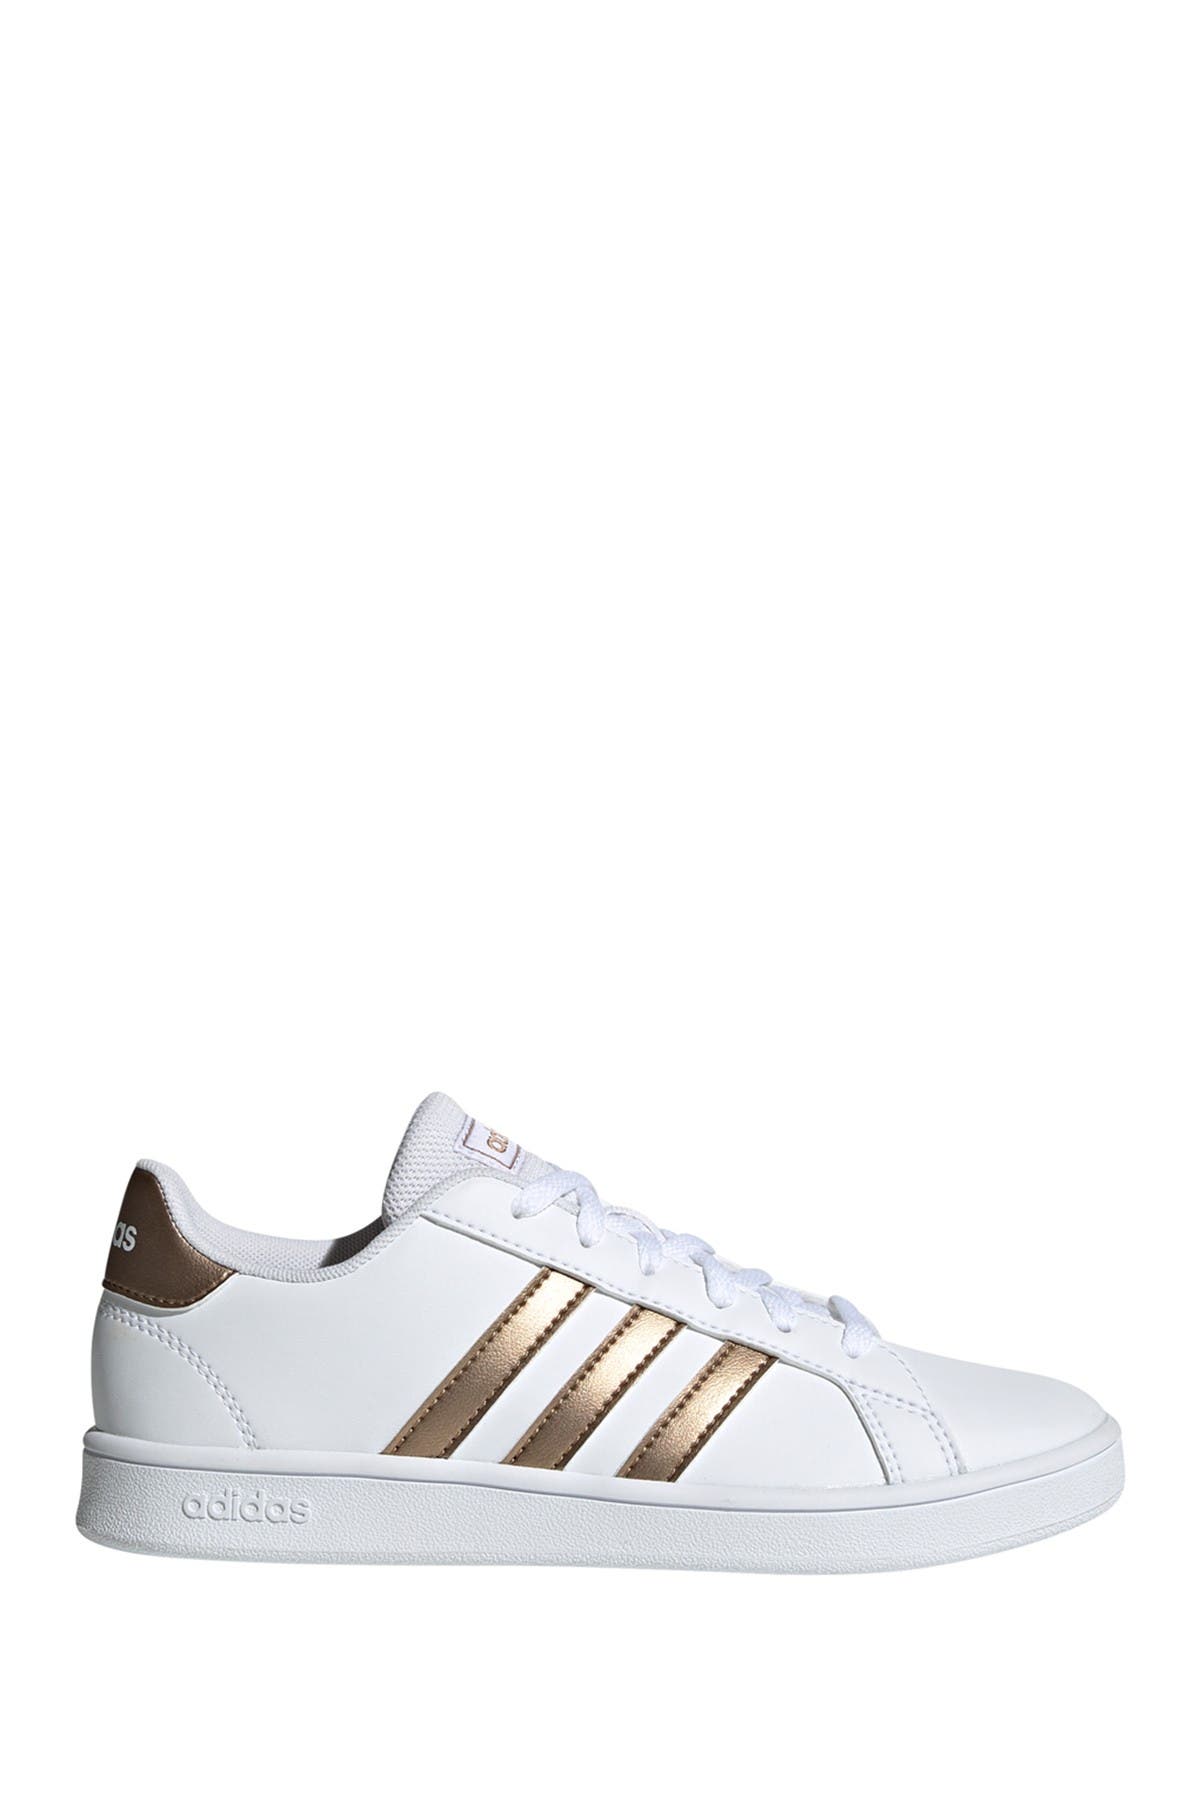 adidas grand court black and gold